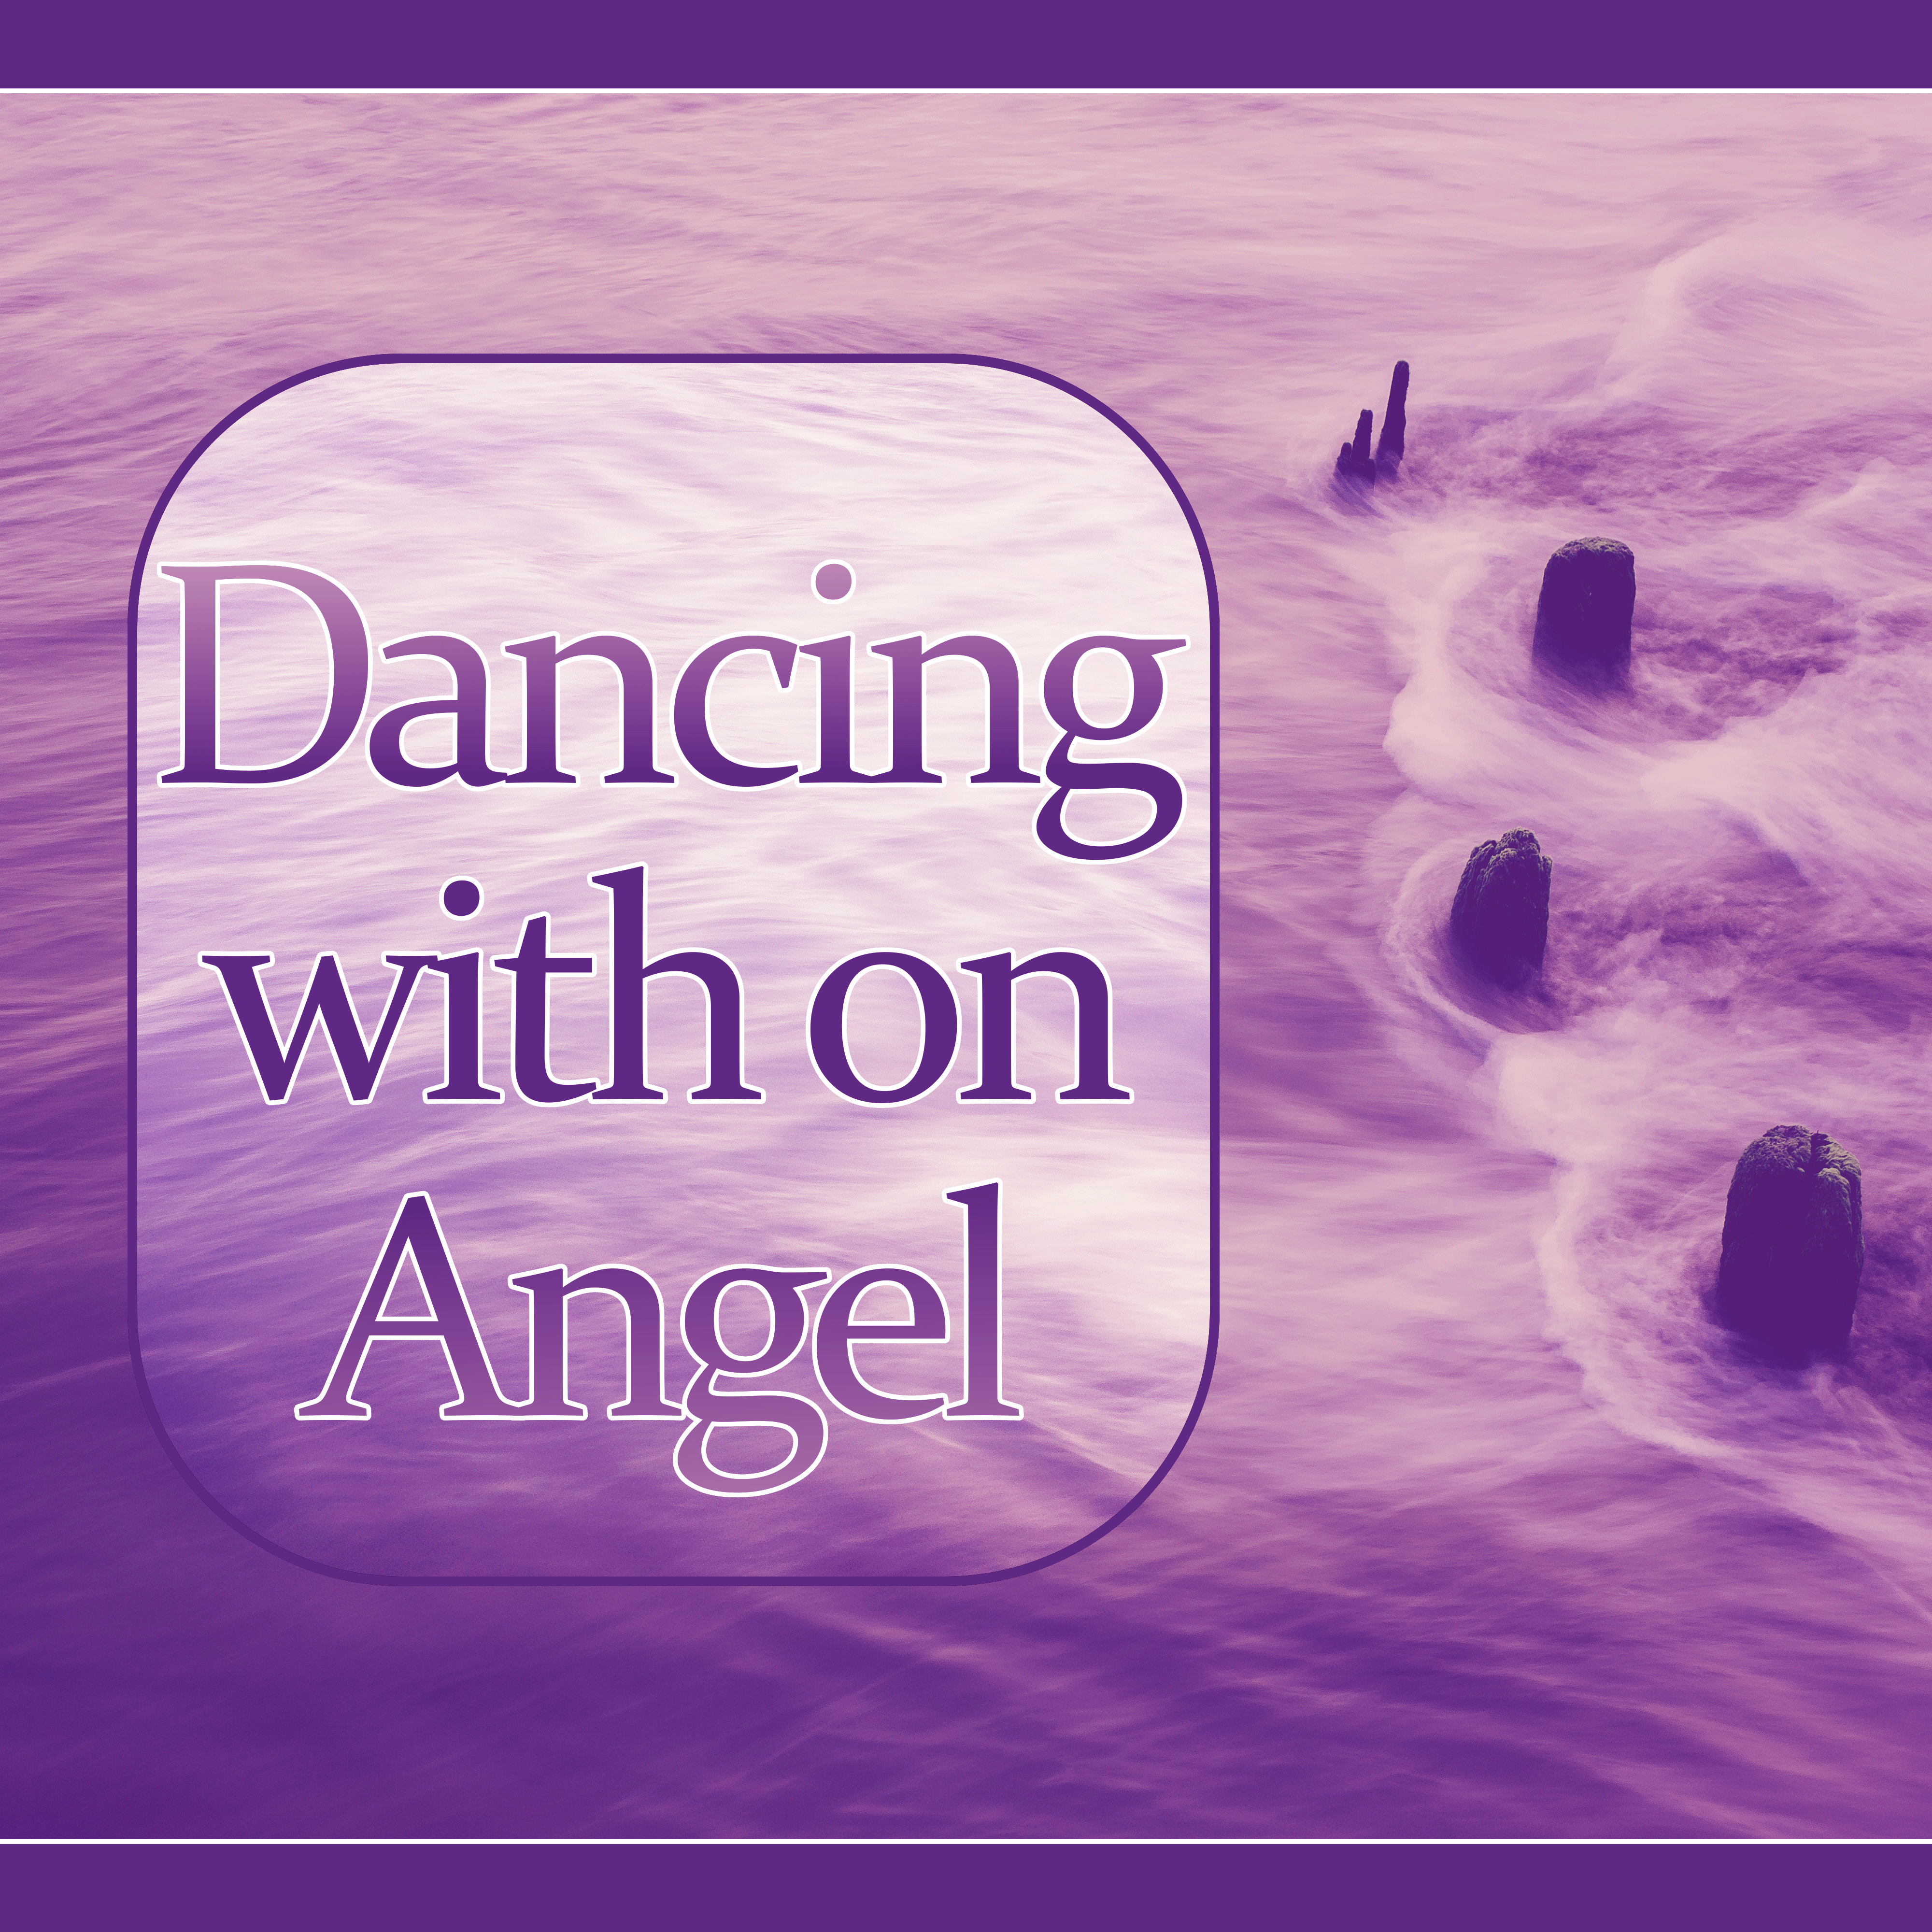 Dancing with on Angel - Sleep Meditation Music and Bedtime Songs to Help You Relax, Meditate, Rest, Destress